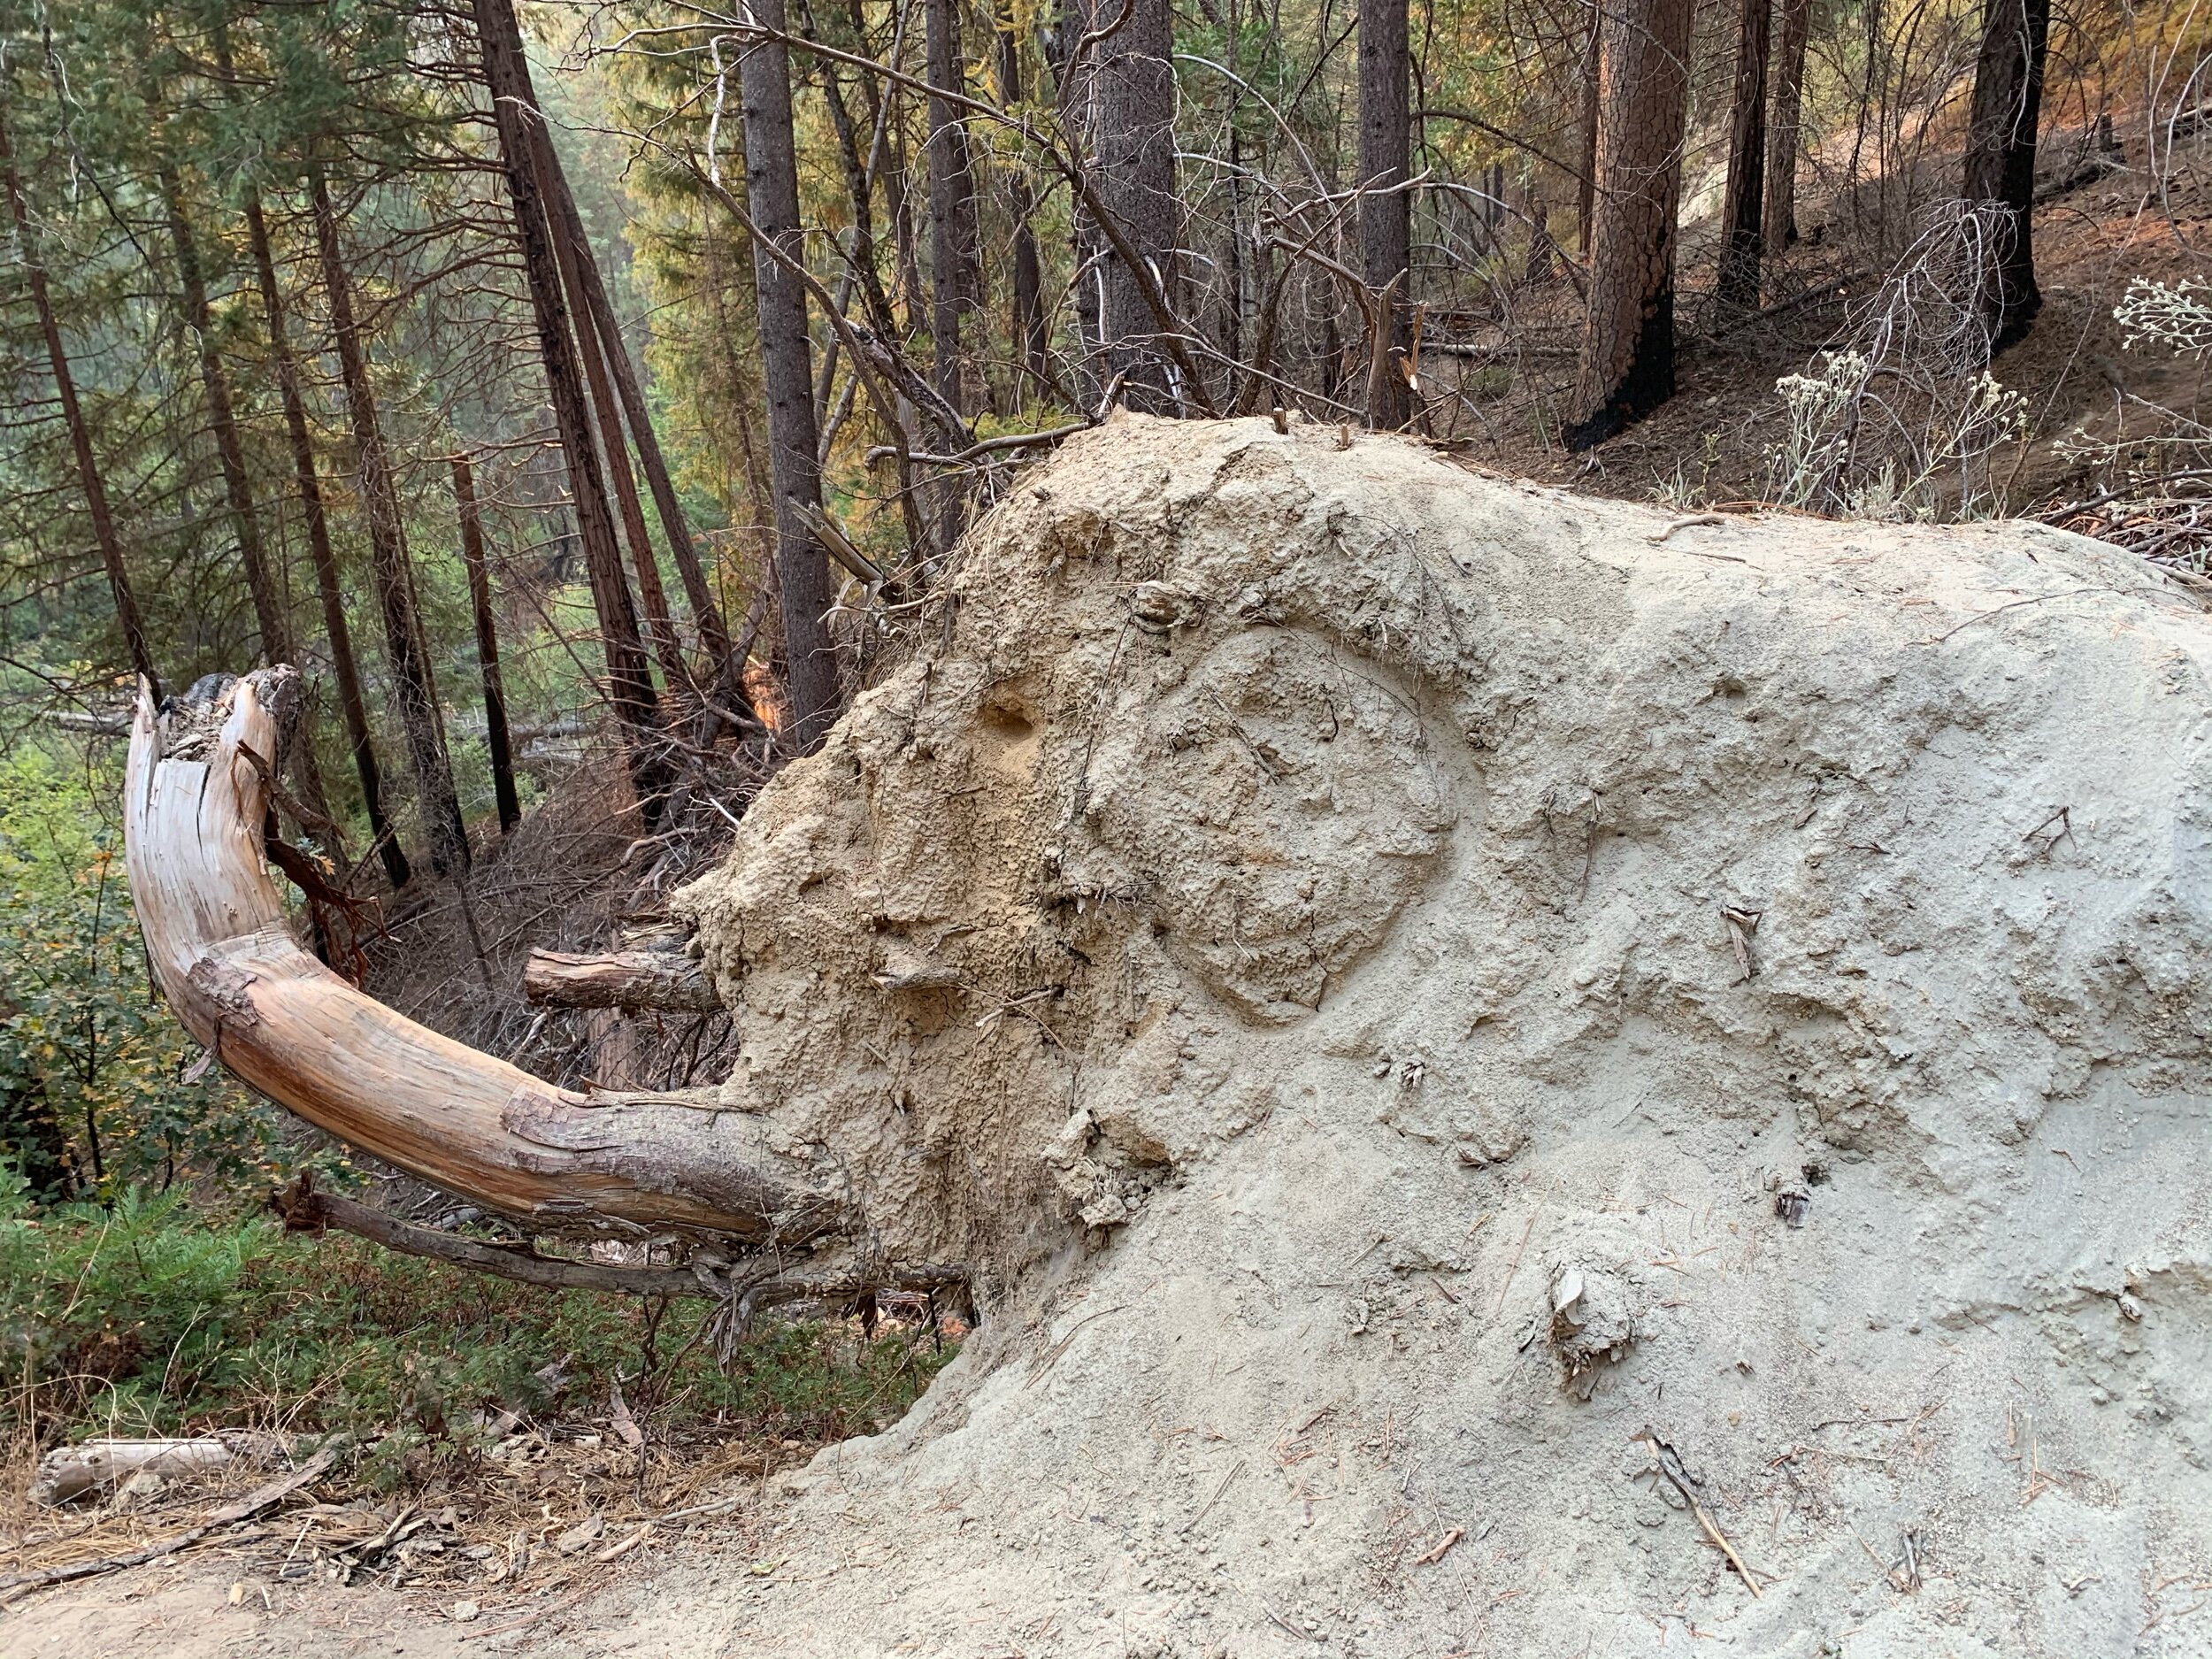  Our ability to completely fill a day is elephant-sized! After visiting Hetch Hetchy and Yosemite NP in the same day, we hiked the along the  South Fork Tuolumne River  outside of the park that evening. It may have been delirium, but I believe I saw 